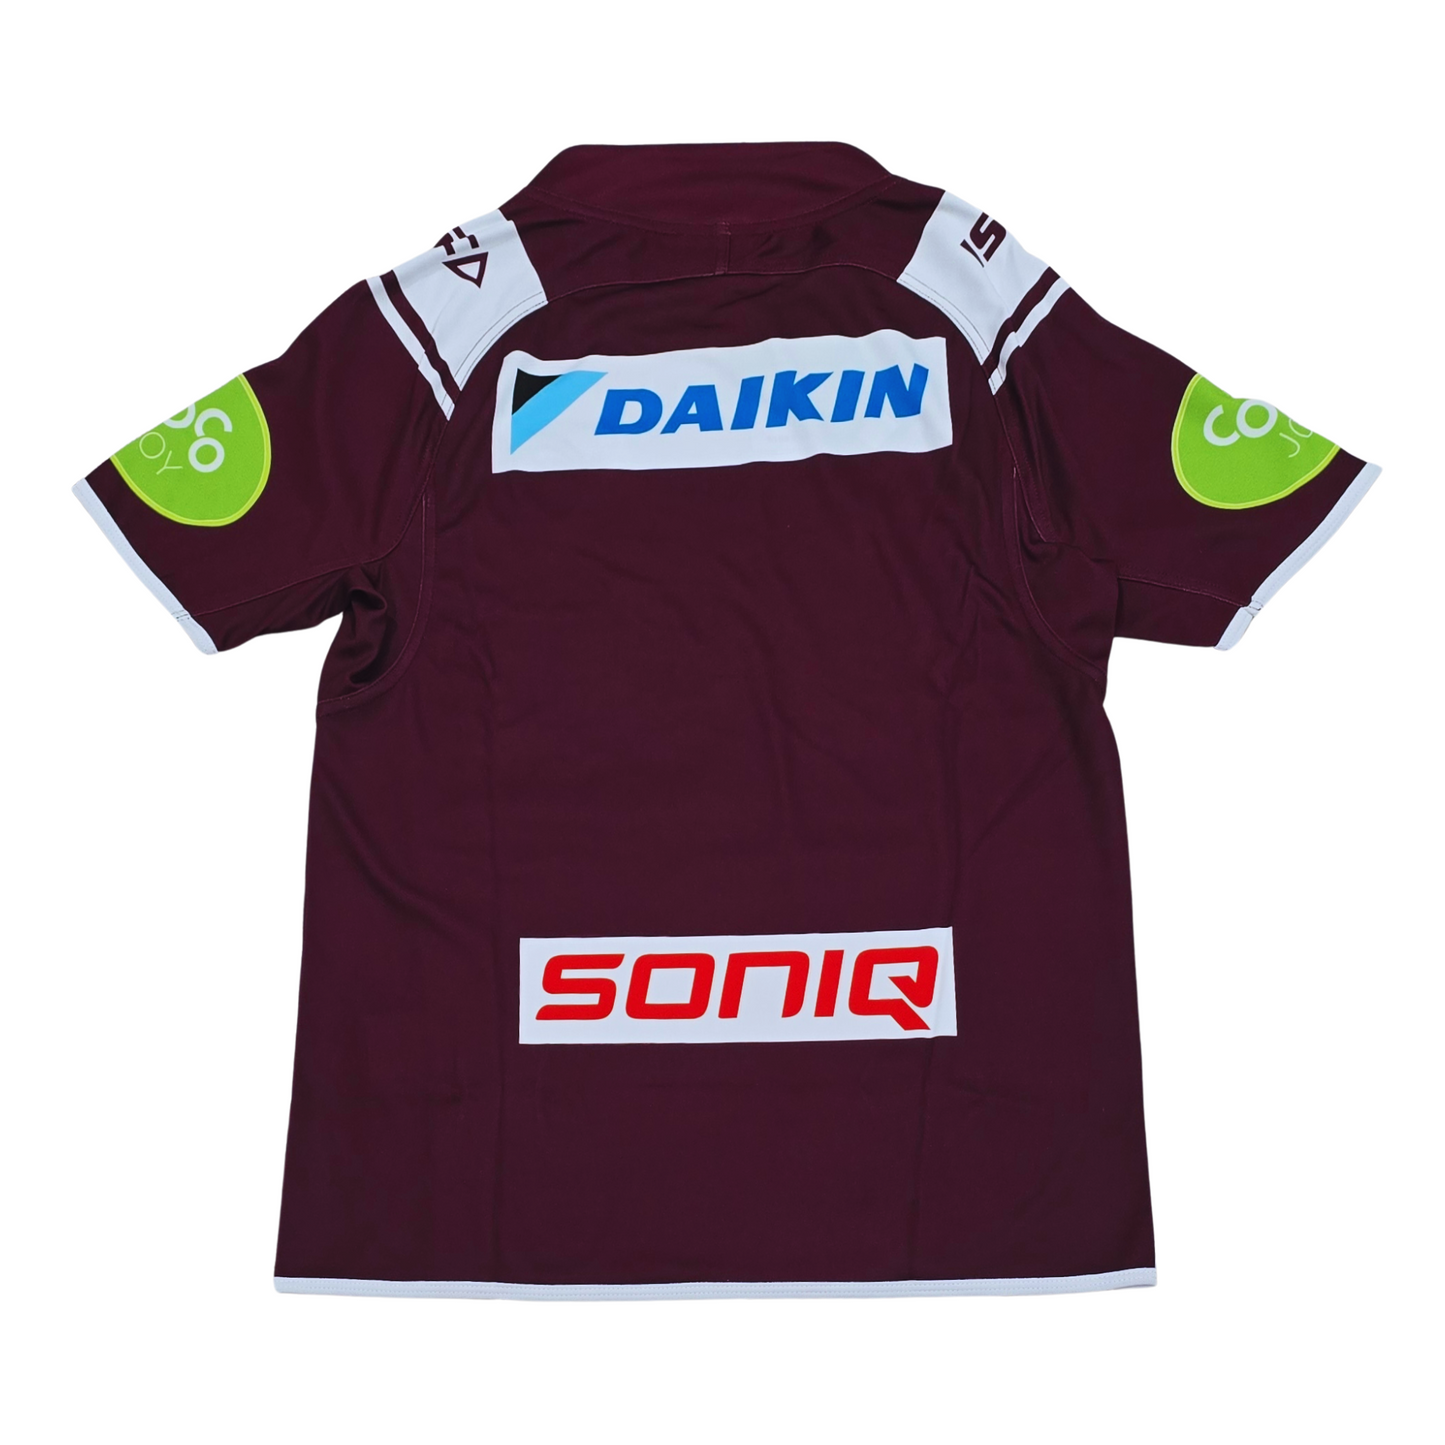 Manly Sea Eagles 2015 Home Jersey (Small)